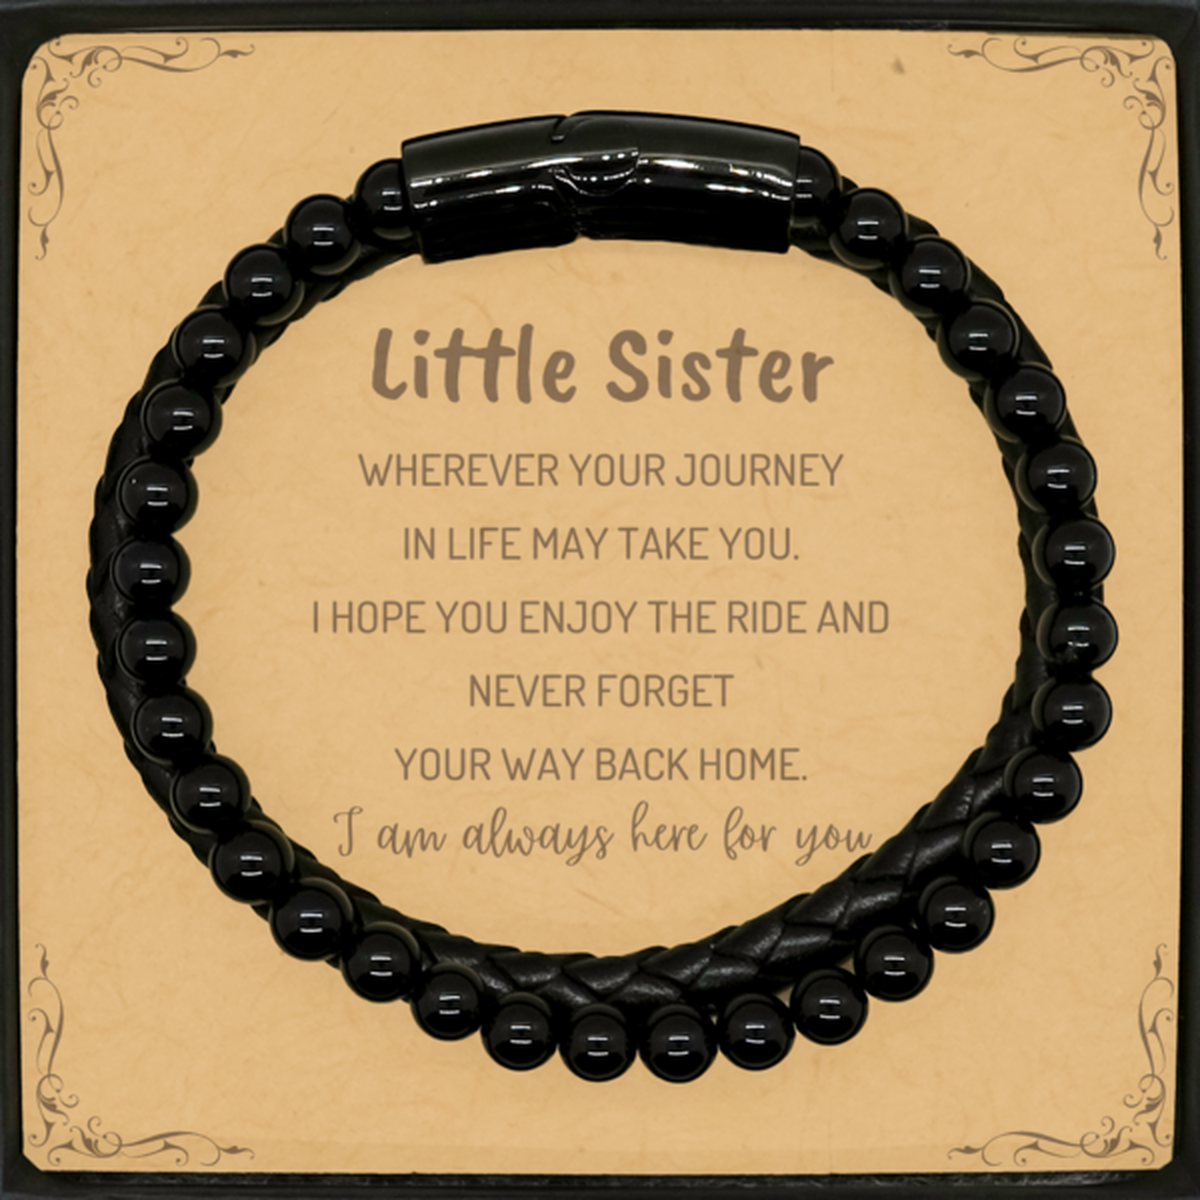 Little Sister wherever your journey in life may take you, I am always here for you Little Sister Stone Leather Bracelets, Awesome Christmas Gifts For Little Sister Message Card, Little Sister Birthday Gifts for Men Women Family Loved One